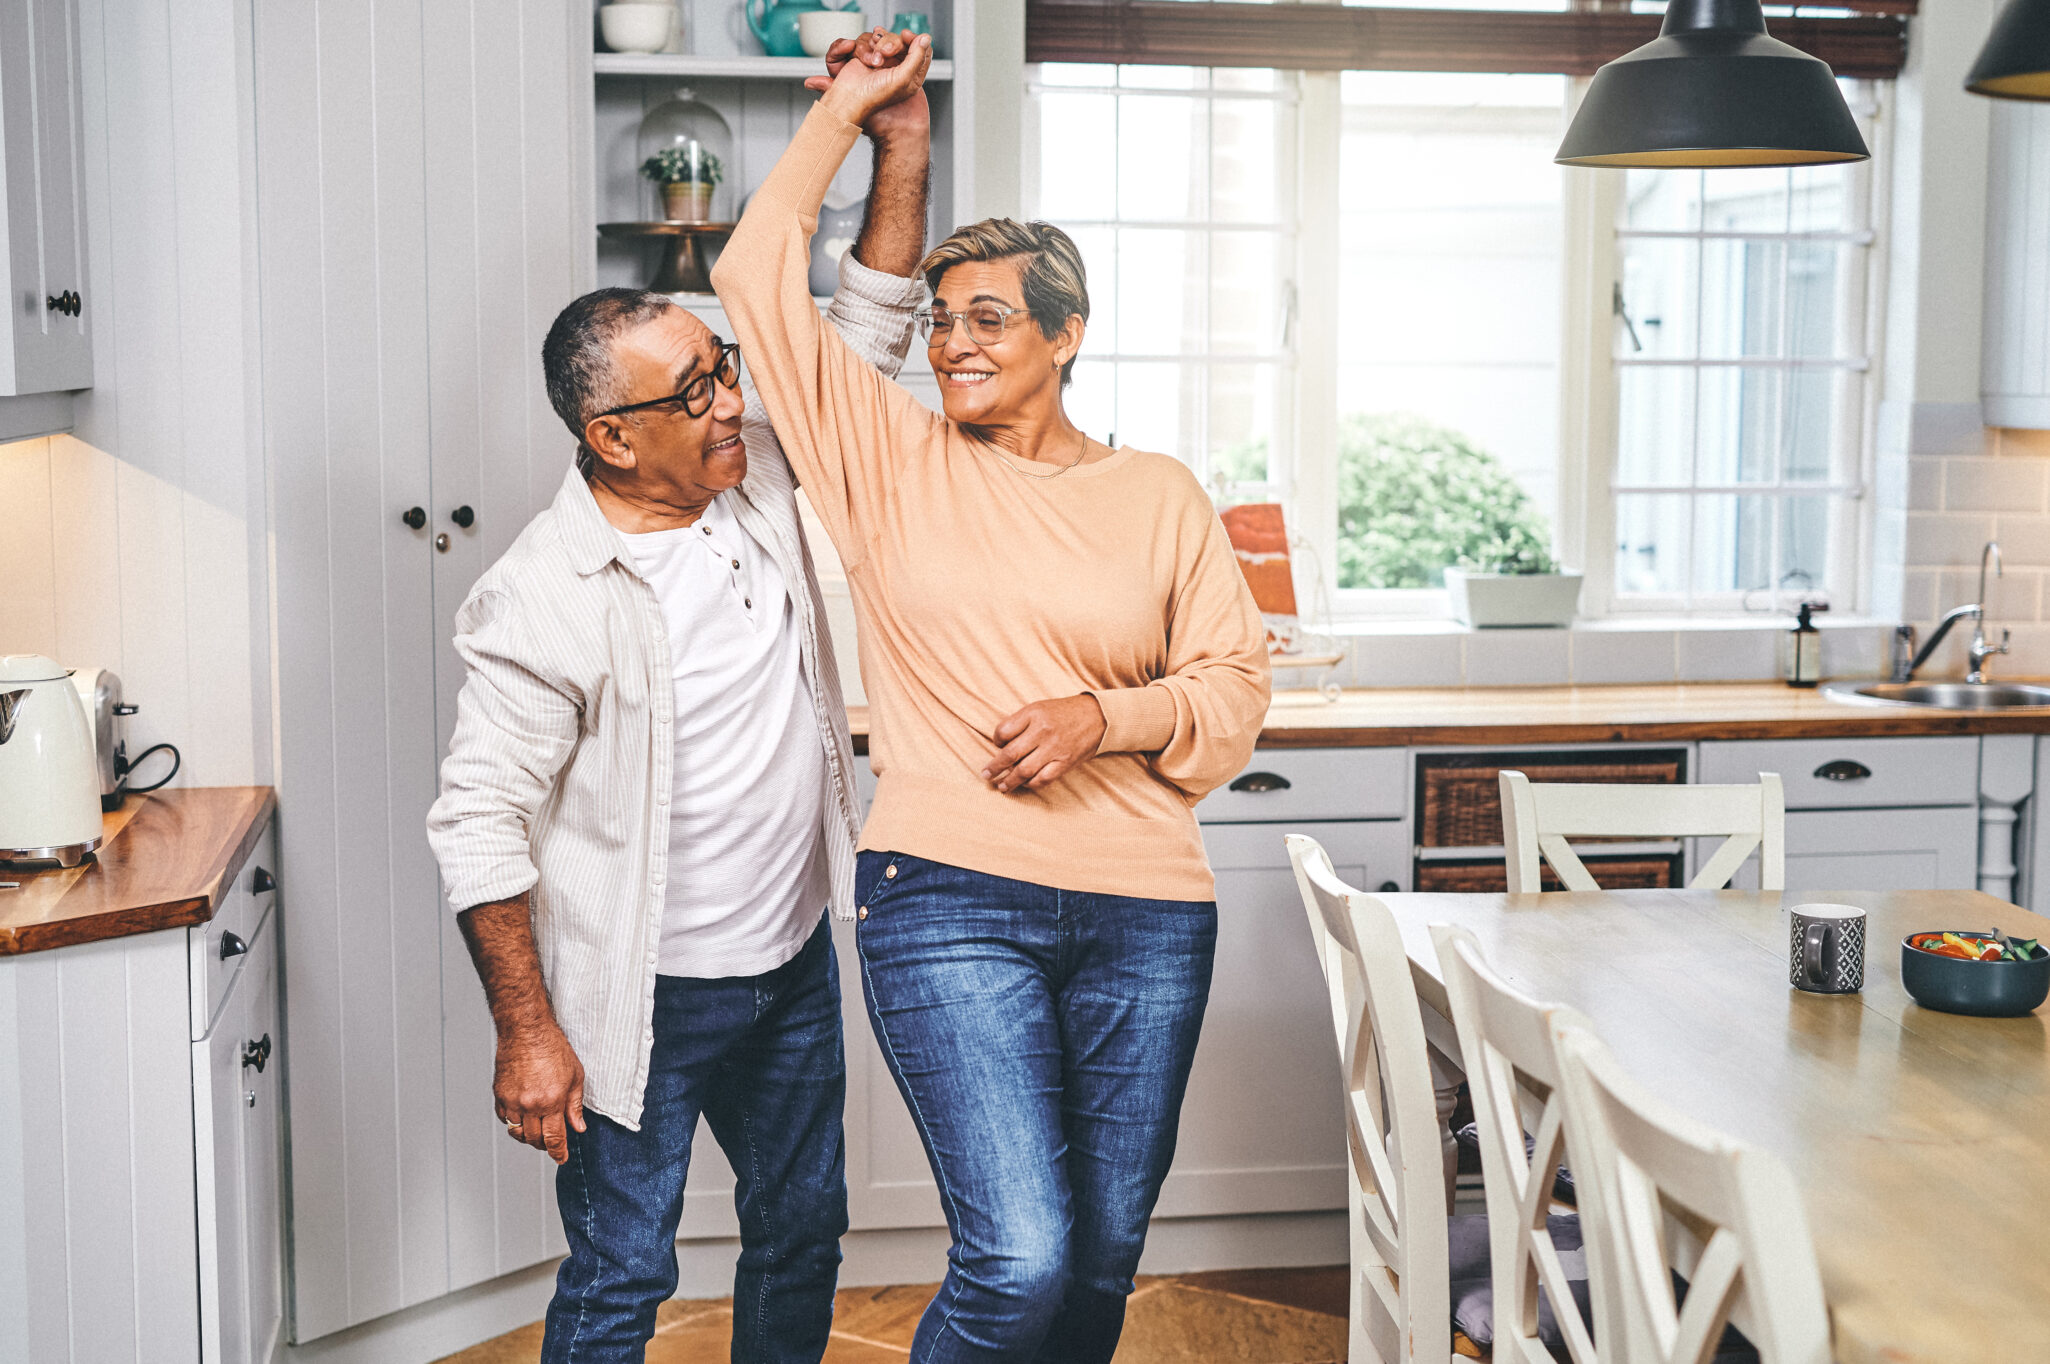 An older couple smile and do a twirl in the kitchen and dining room area